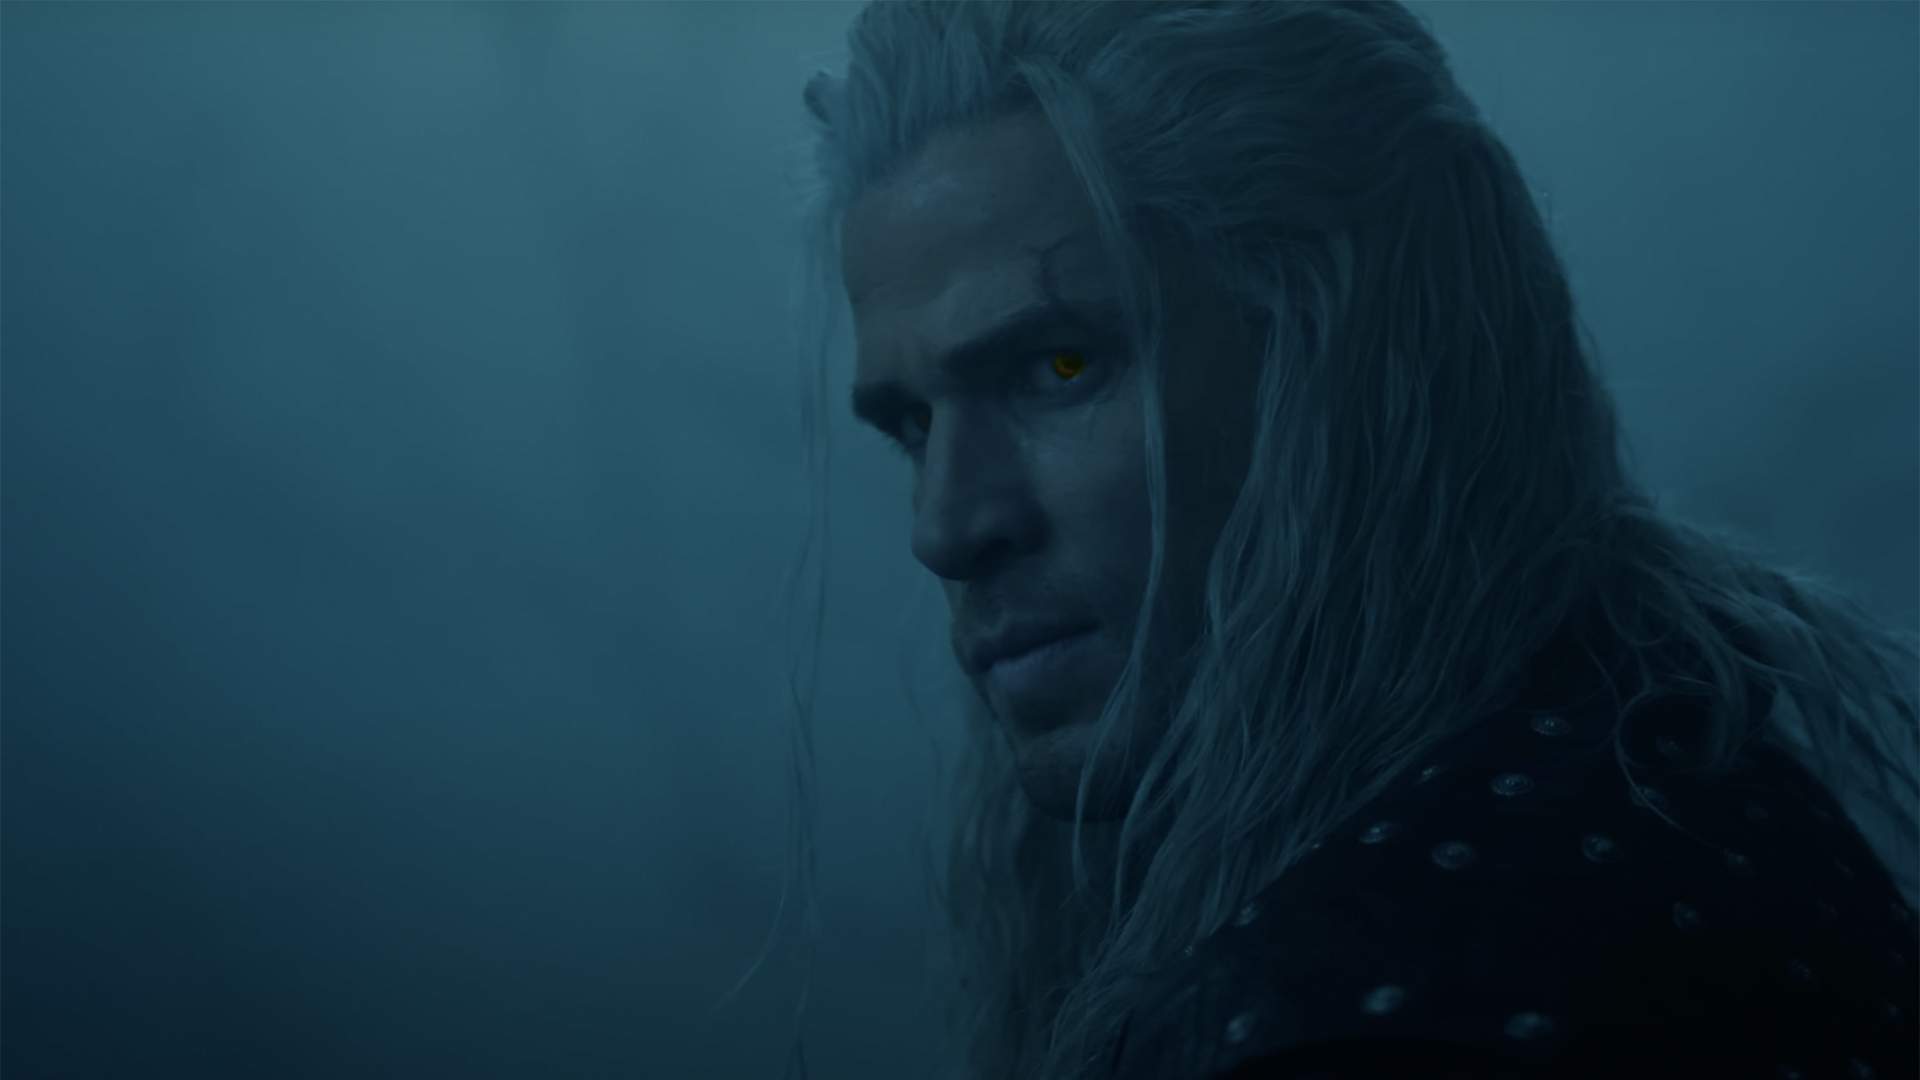 Your First Look at Liam Hemsworth as Geralt Is Here in the Debut Teaser for 'The Witcher' Season Four